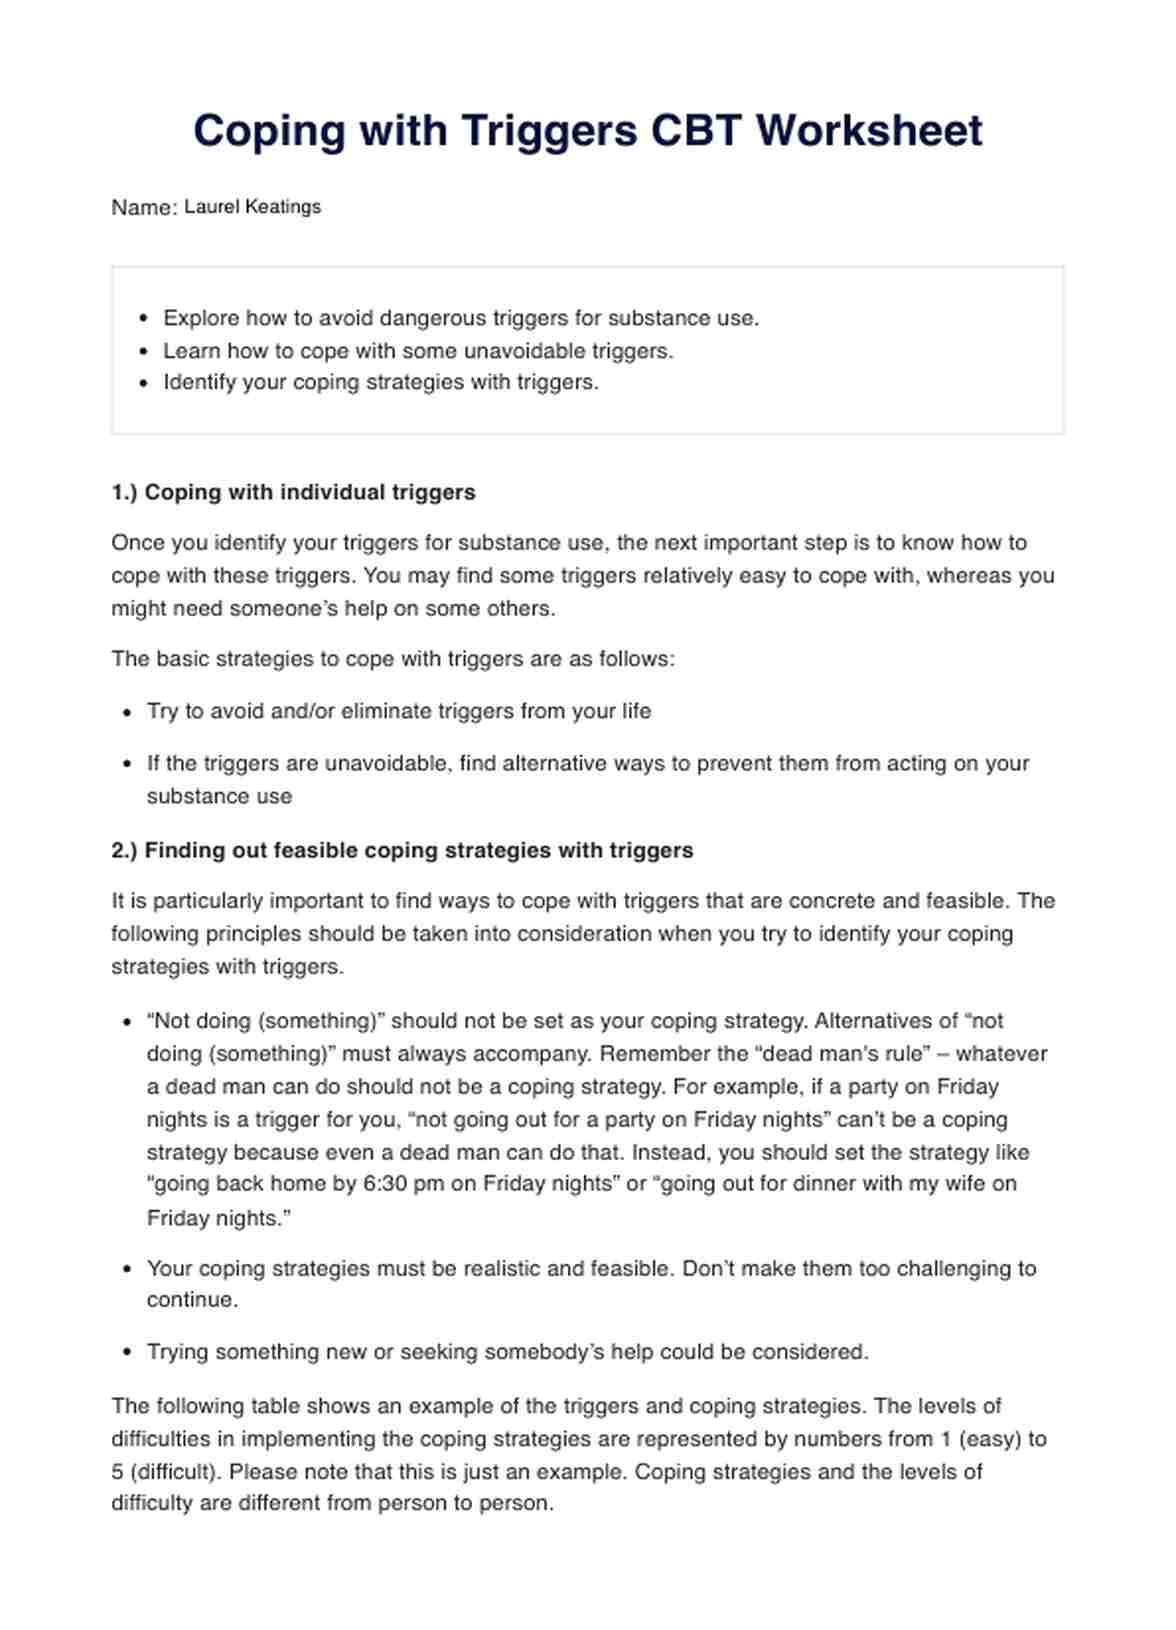 Coping with Triggers CBT Worksheets PDF Example